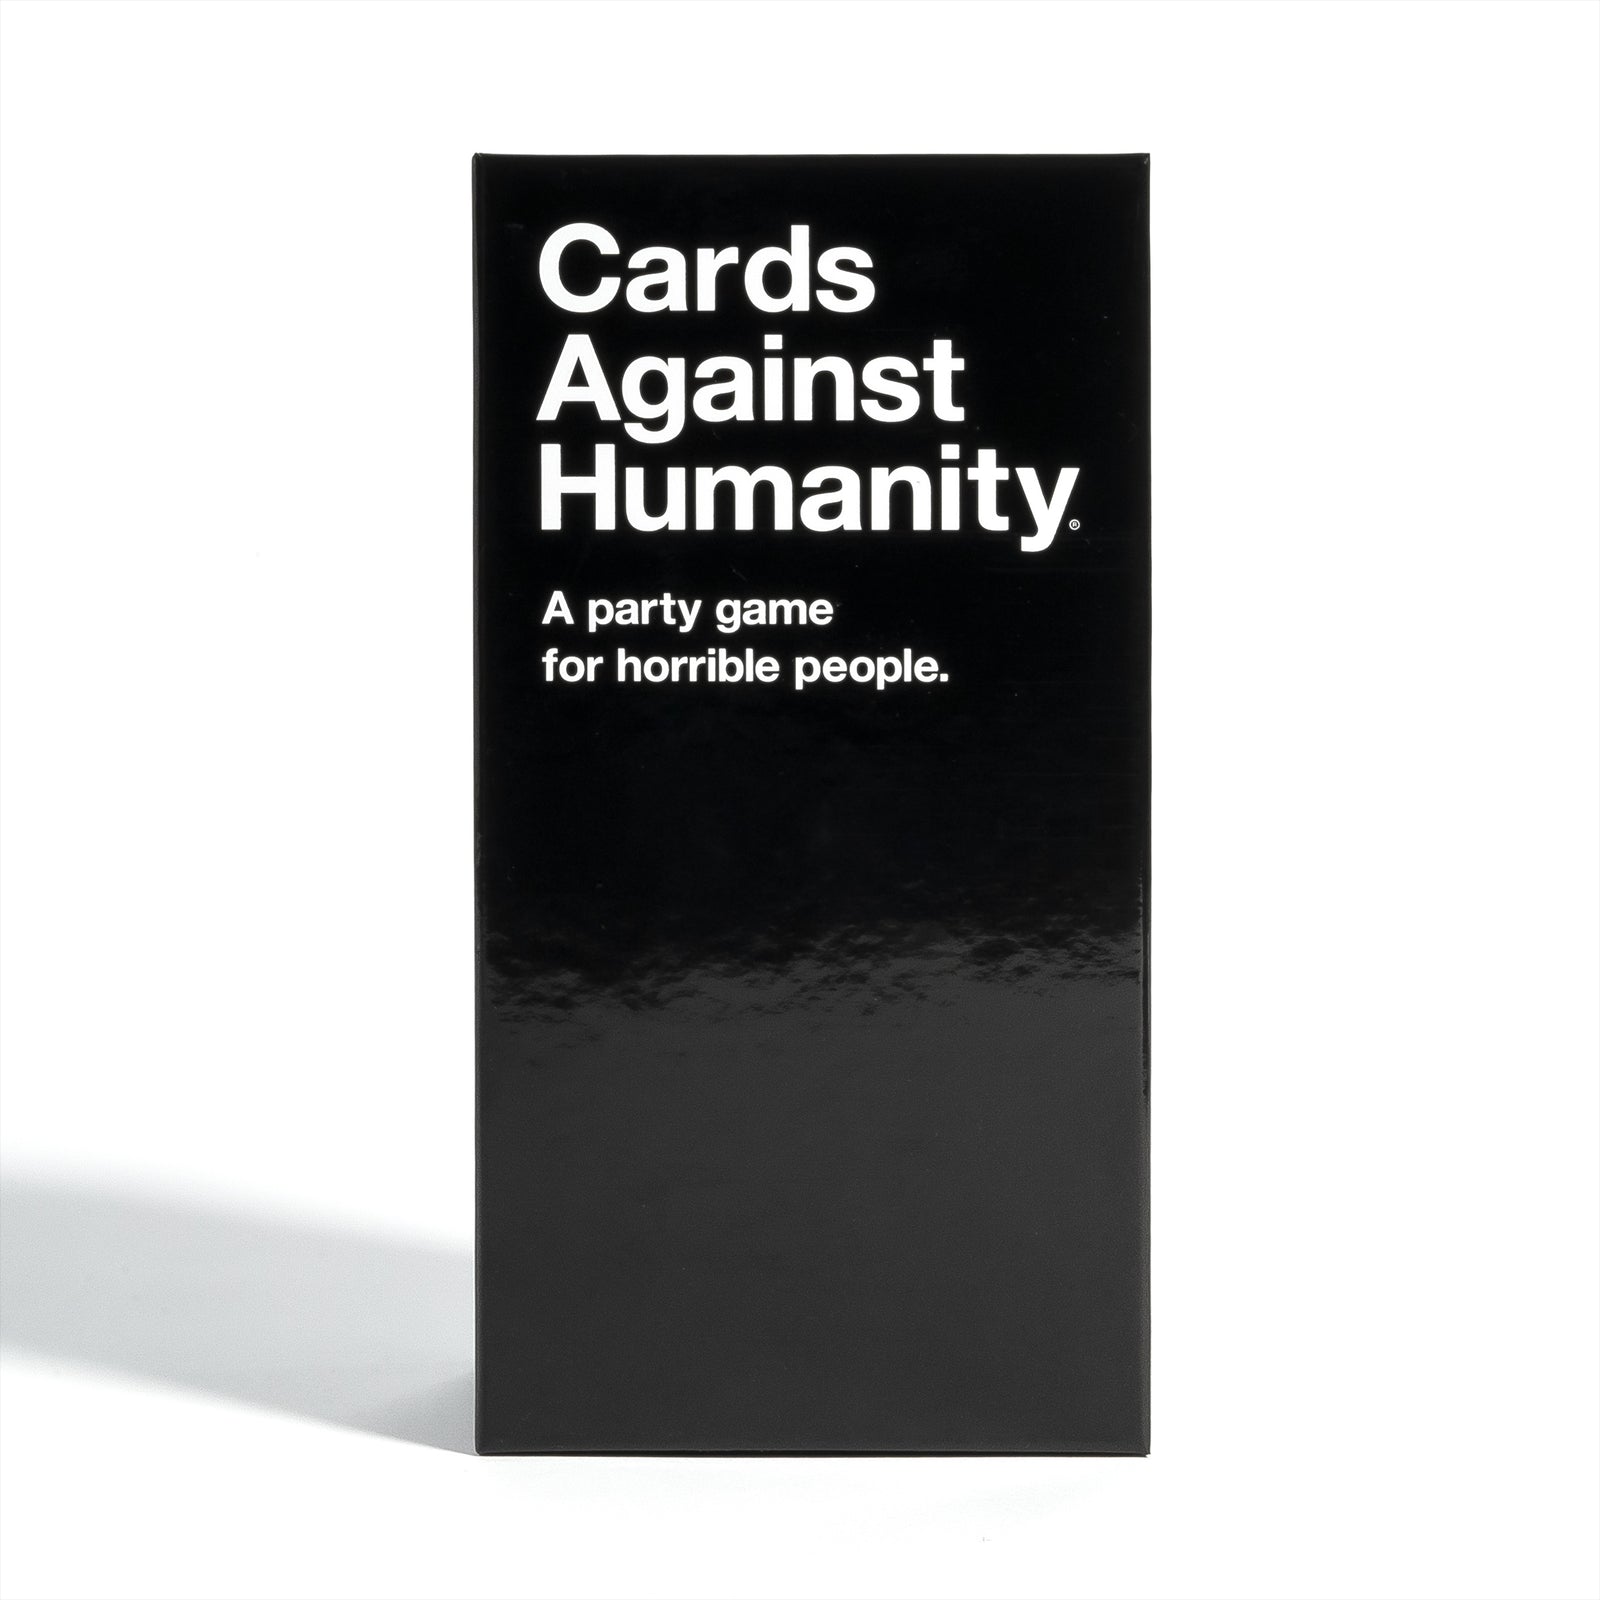 The Box for Cards against humanity